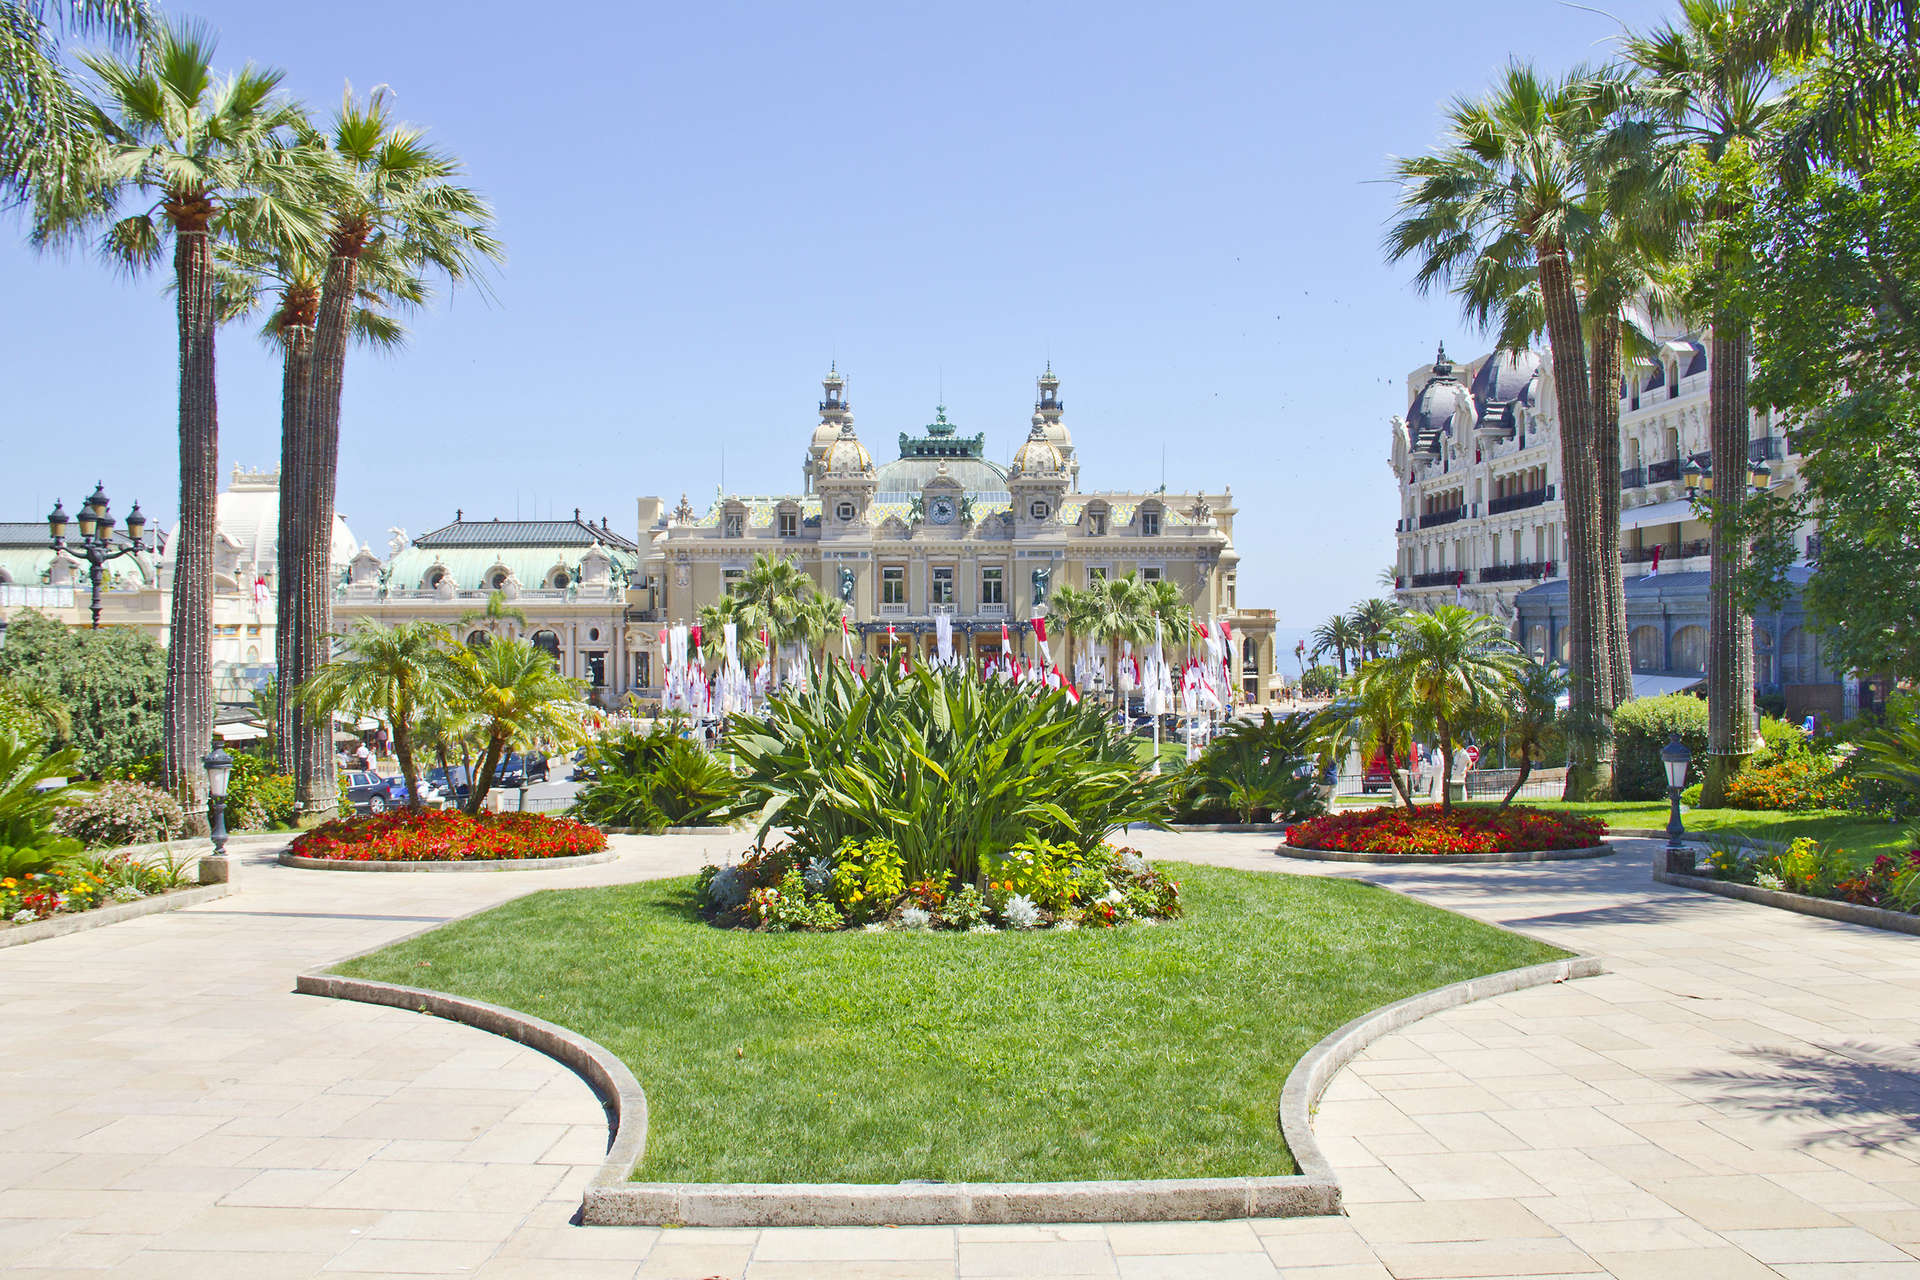 The Casino de Monte Carlo has played a starring role in films including Golden Eye and Ocean’s Twelve